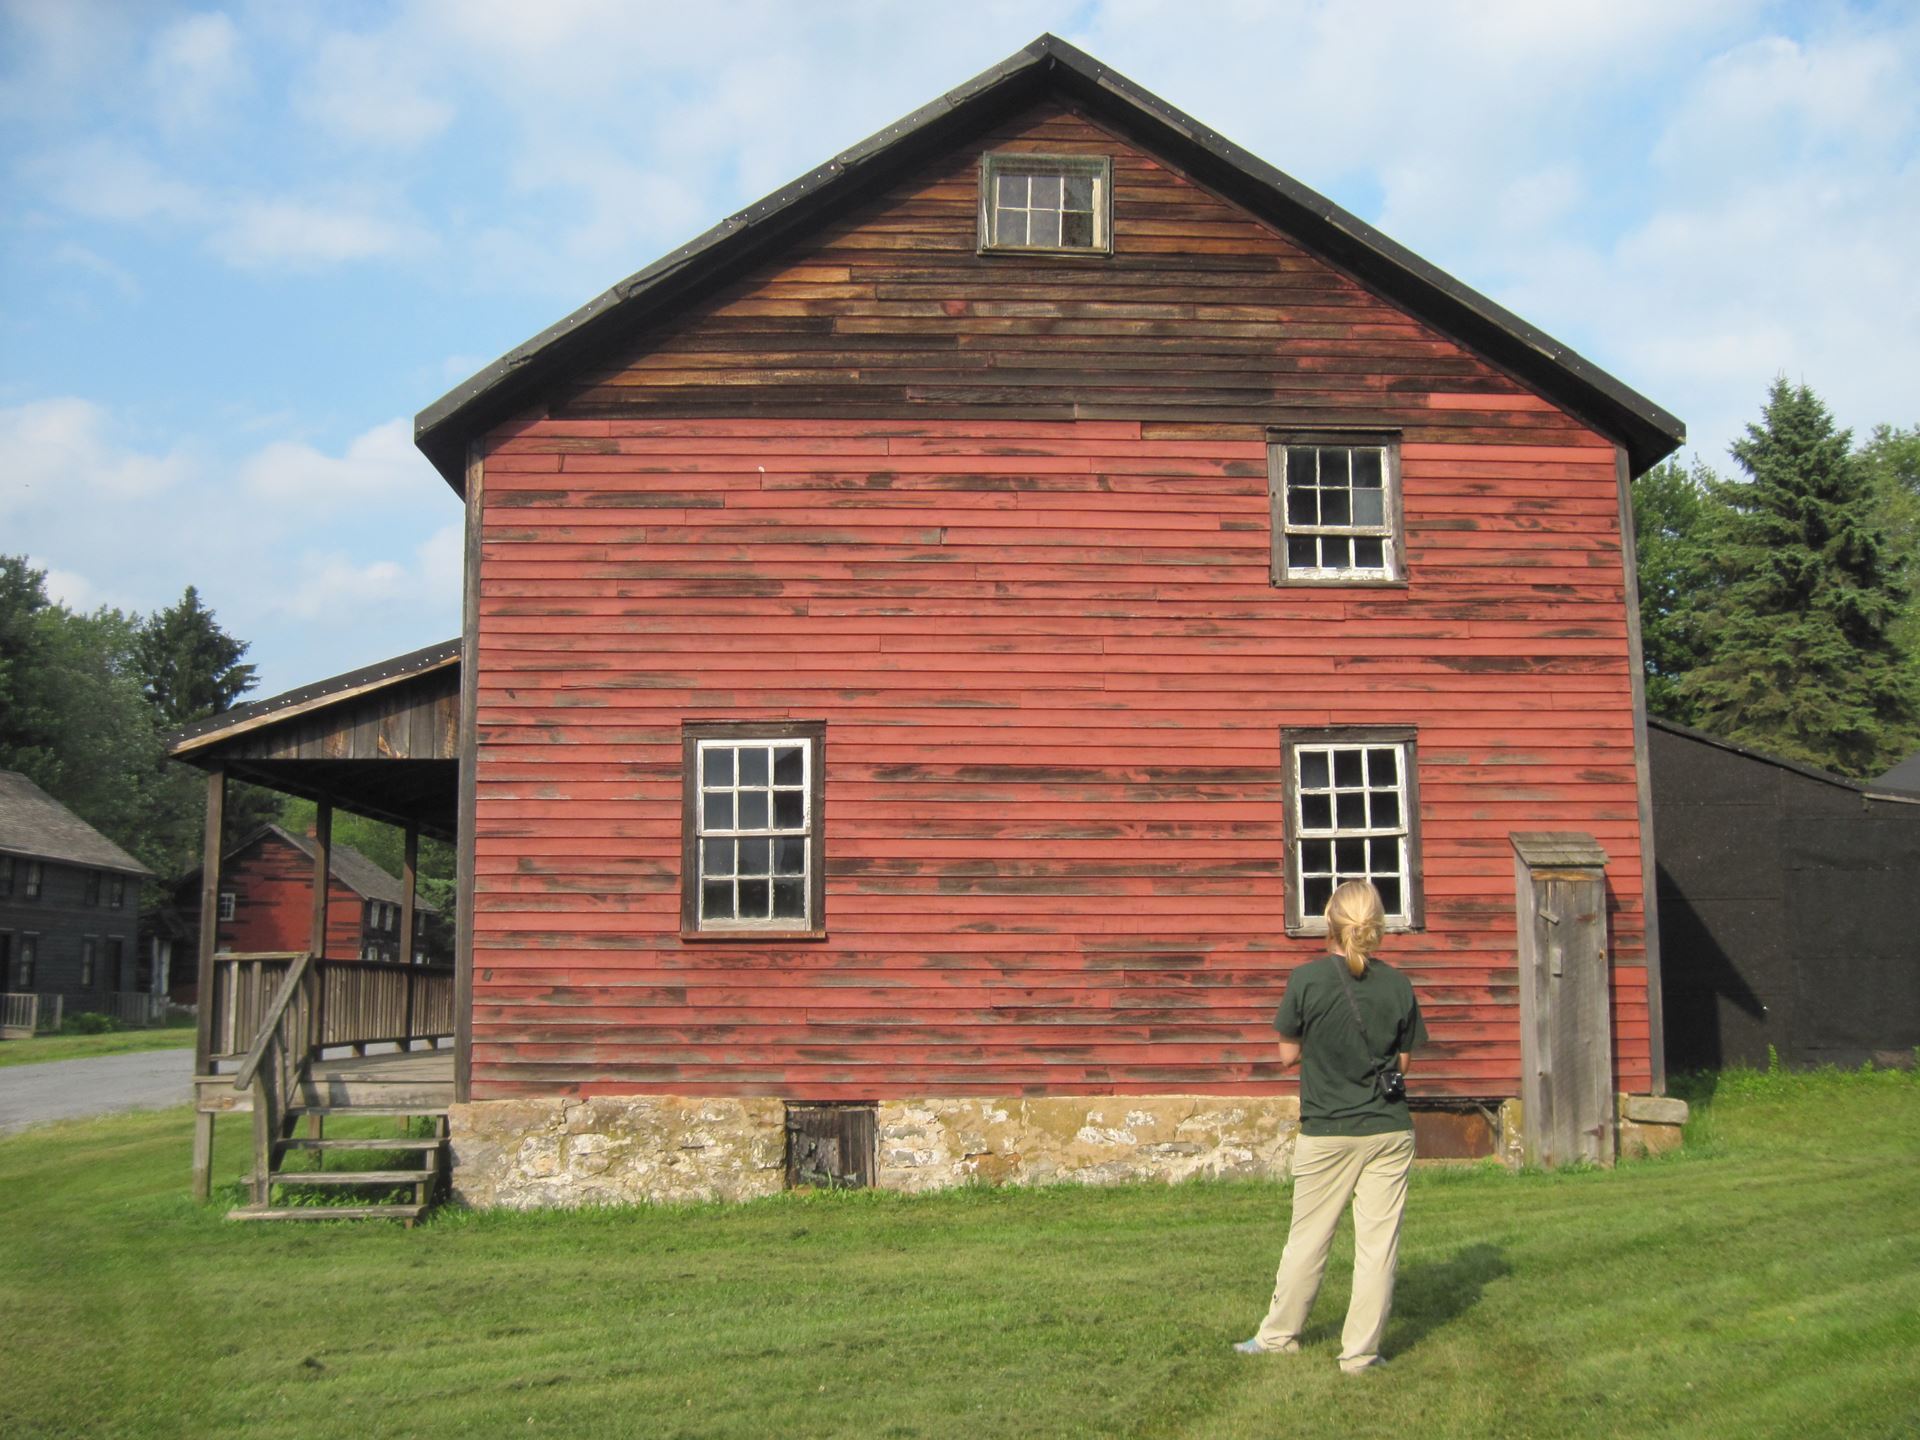 2017 fellow V. Camille Westmont at her project site, Eckley Miners' Village in Pennsylvania